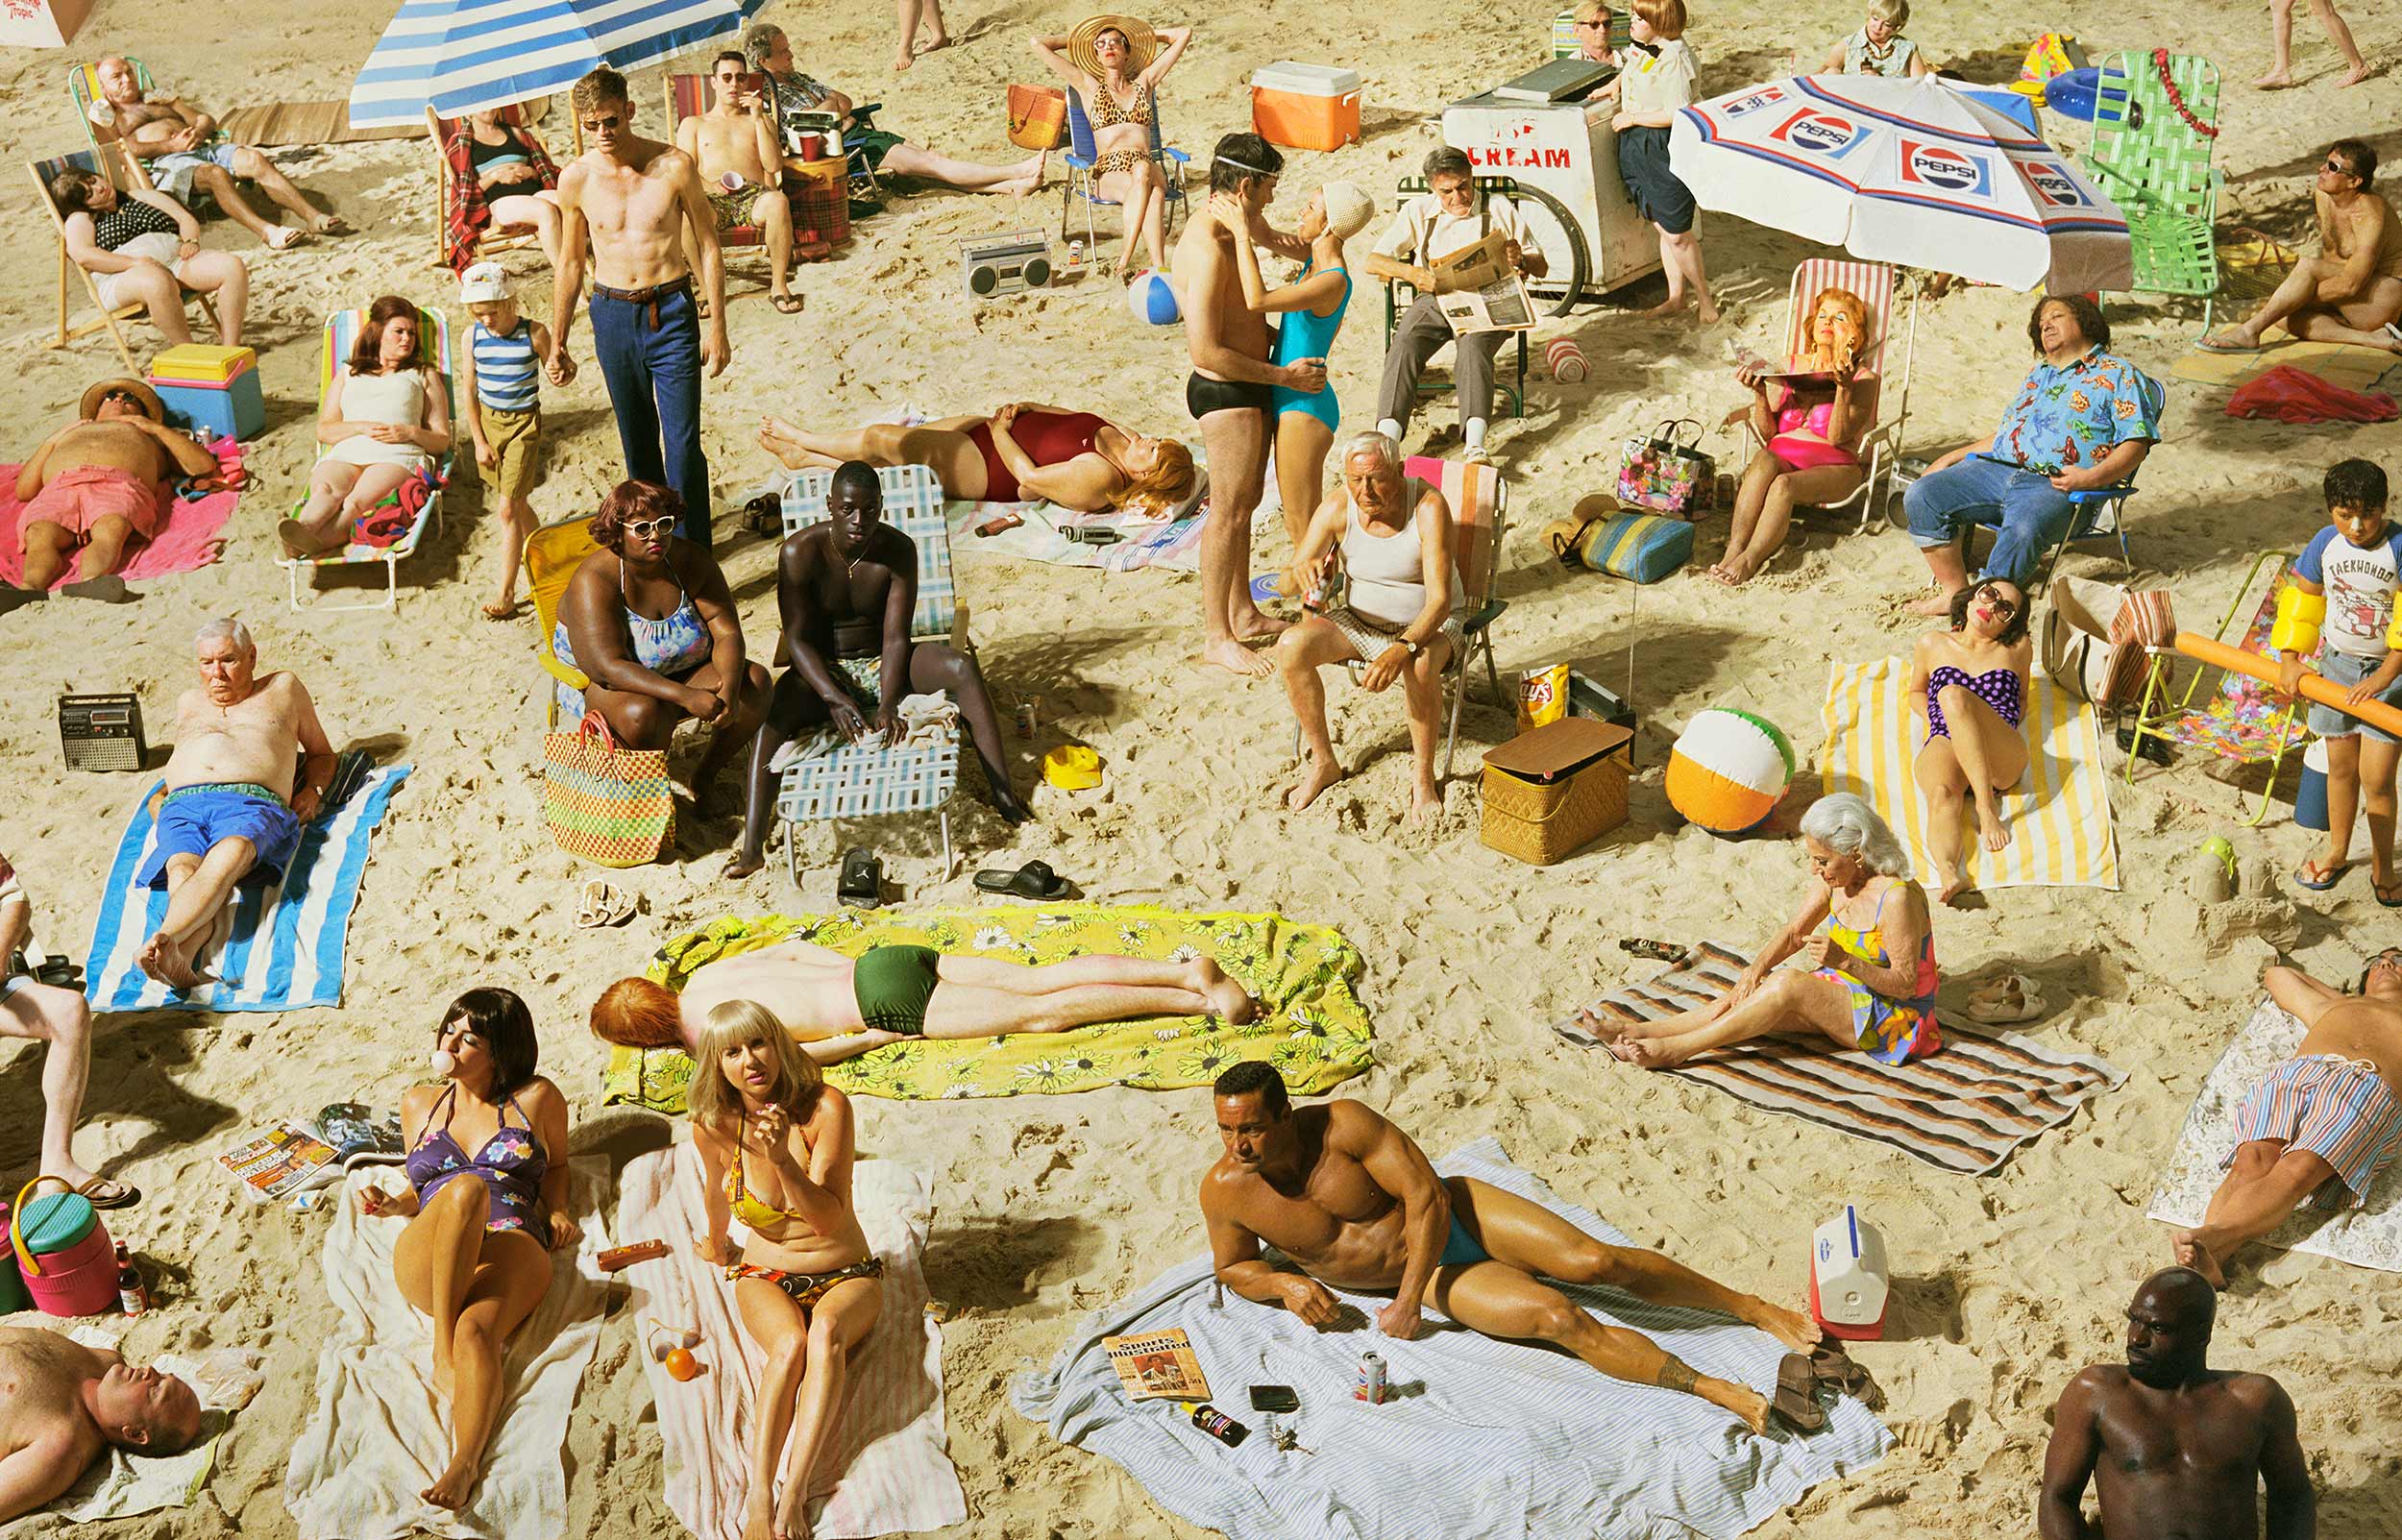   Face In The Crowd   Crowd #3 (Pelican Beach),  2013 59 x 92.85 inches 